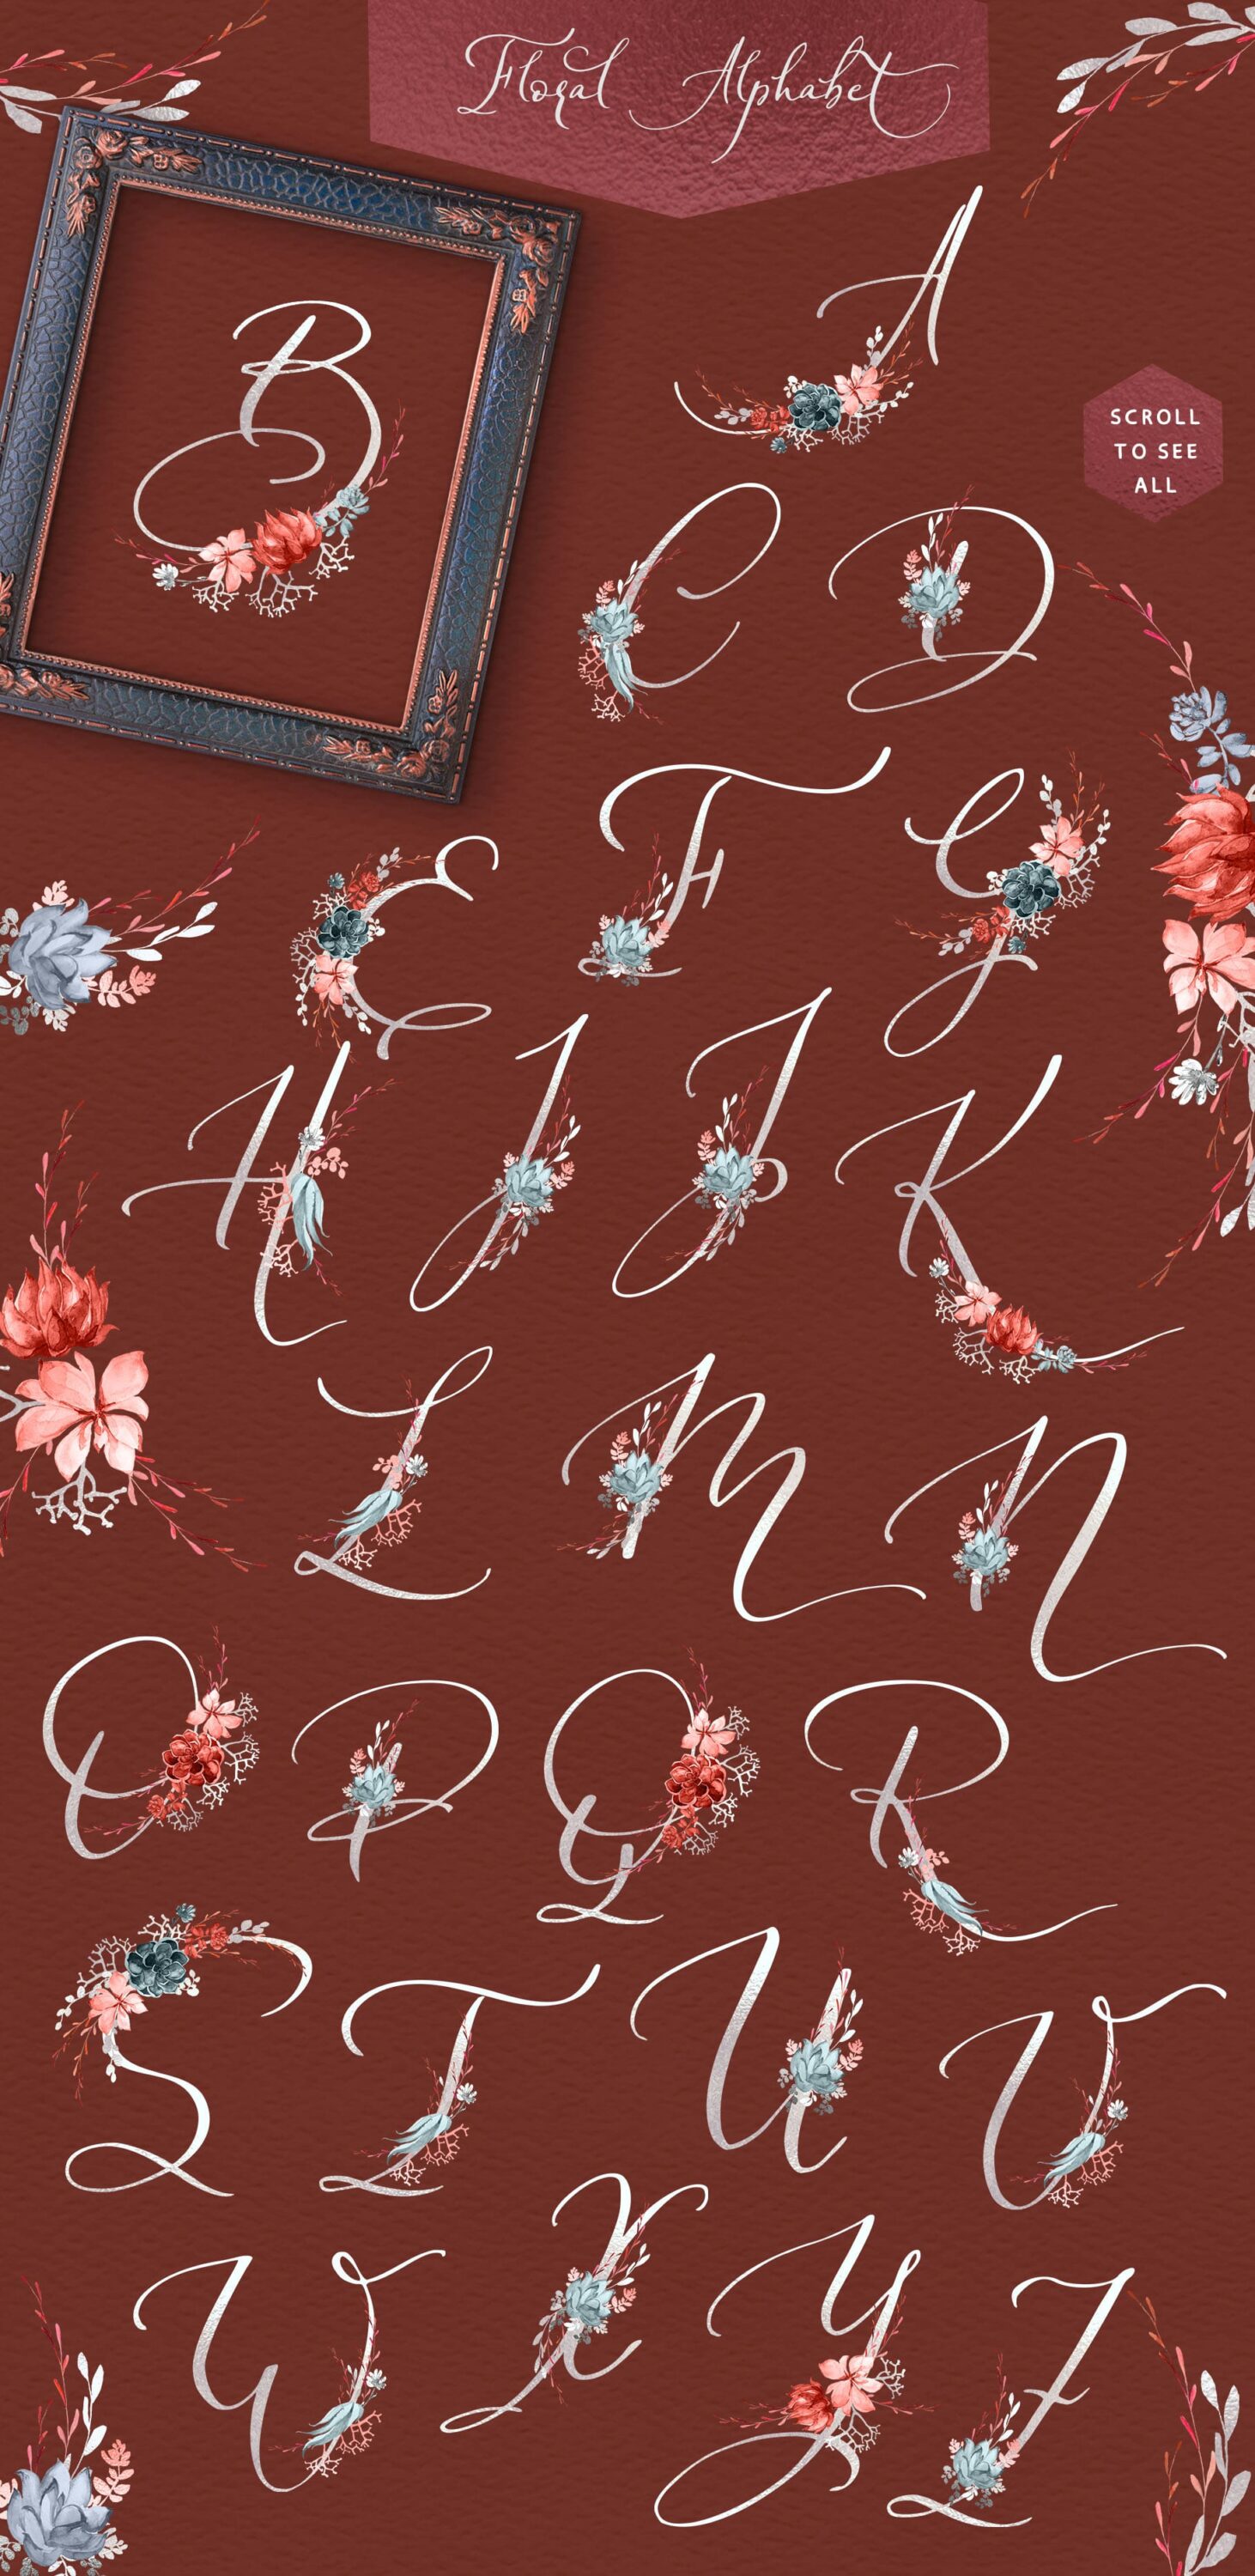 General view of coral floral wedding clipart and fonts.